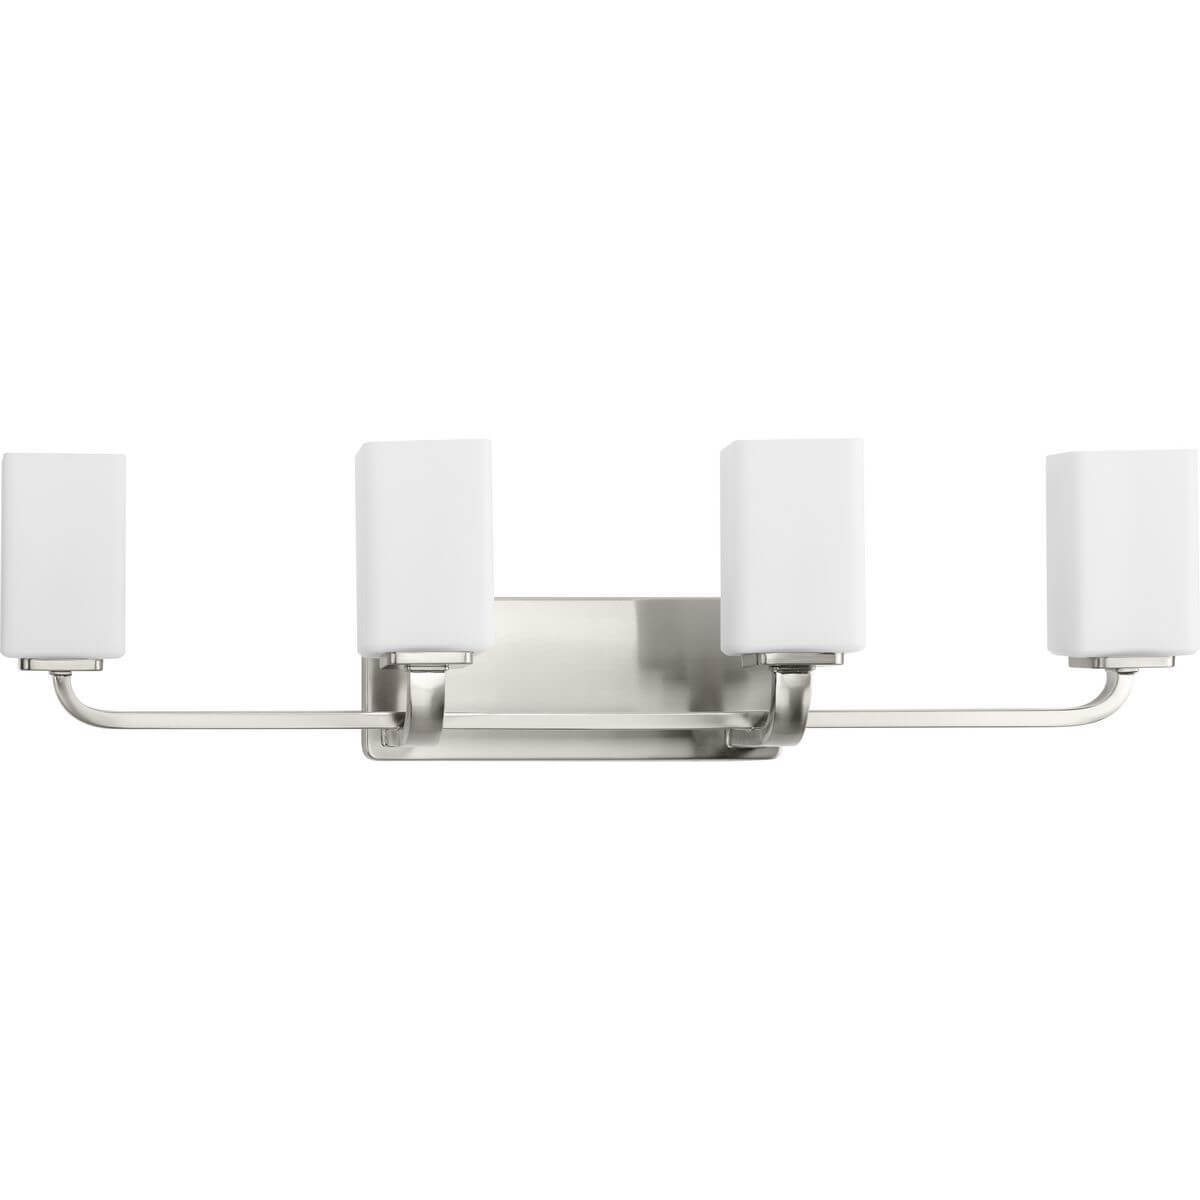 Progress Lighting Cowan 4 Light 34 inch Bath Vanity Light in Brushed Nickel with Etched Opal Glass P300371-009